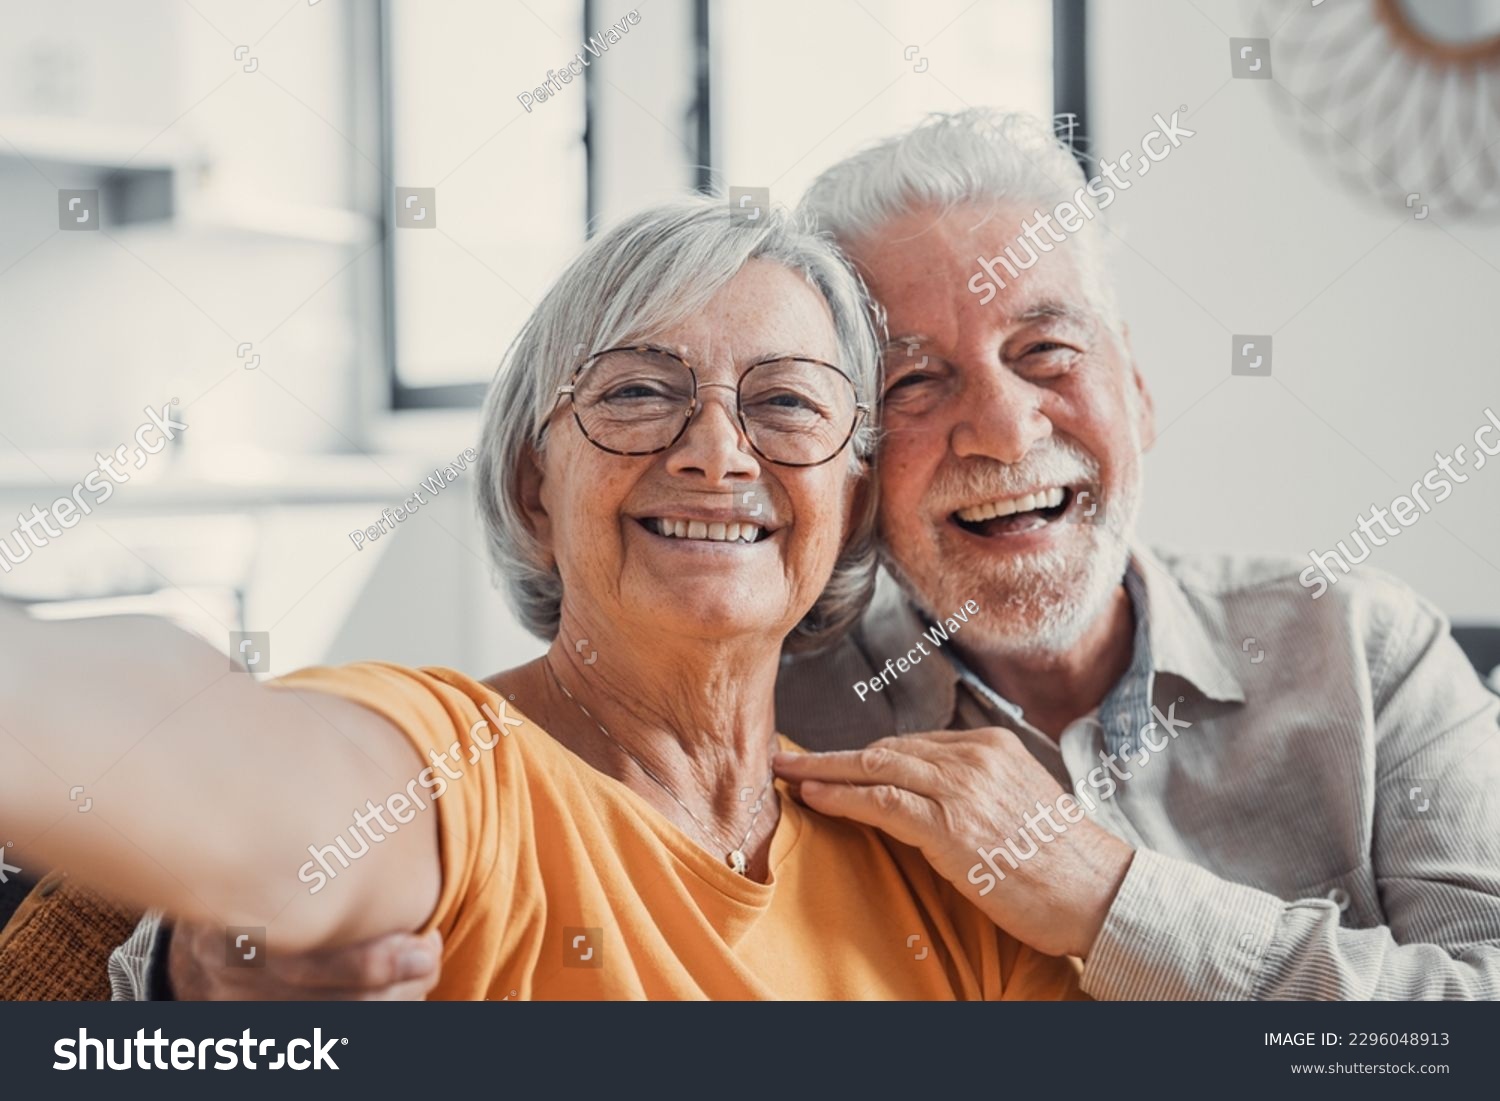 Head shot portrait happy senior couple taking selfie, having fun with phone cam, smiling aged wife and husband hugging, looking at camera, posing for photo, aged man vlogger recording video #2296048913